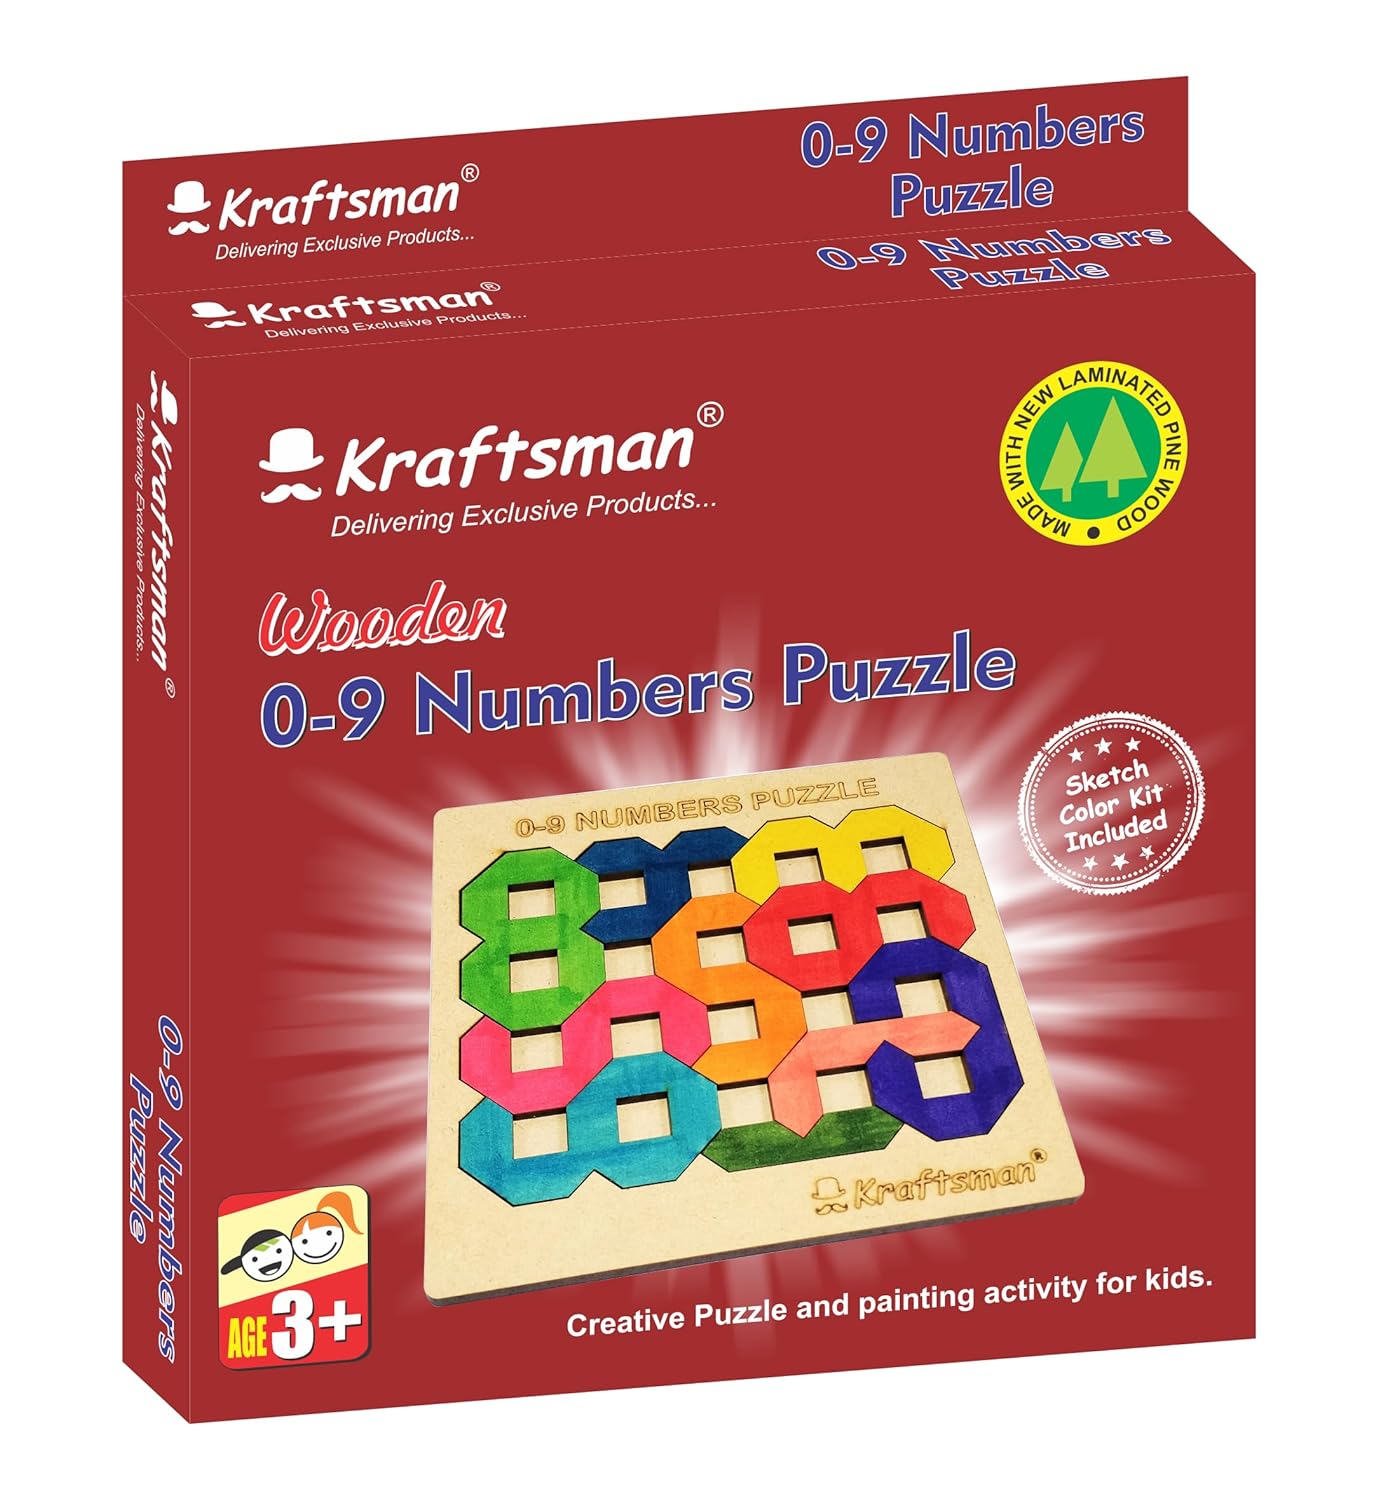 Kraftsman Color Your Puzzle Travel Games for 4+ Kids Fun Learning Educational Board Game (0-9 Digital Numbers Puzzle)